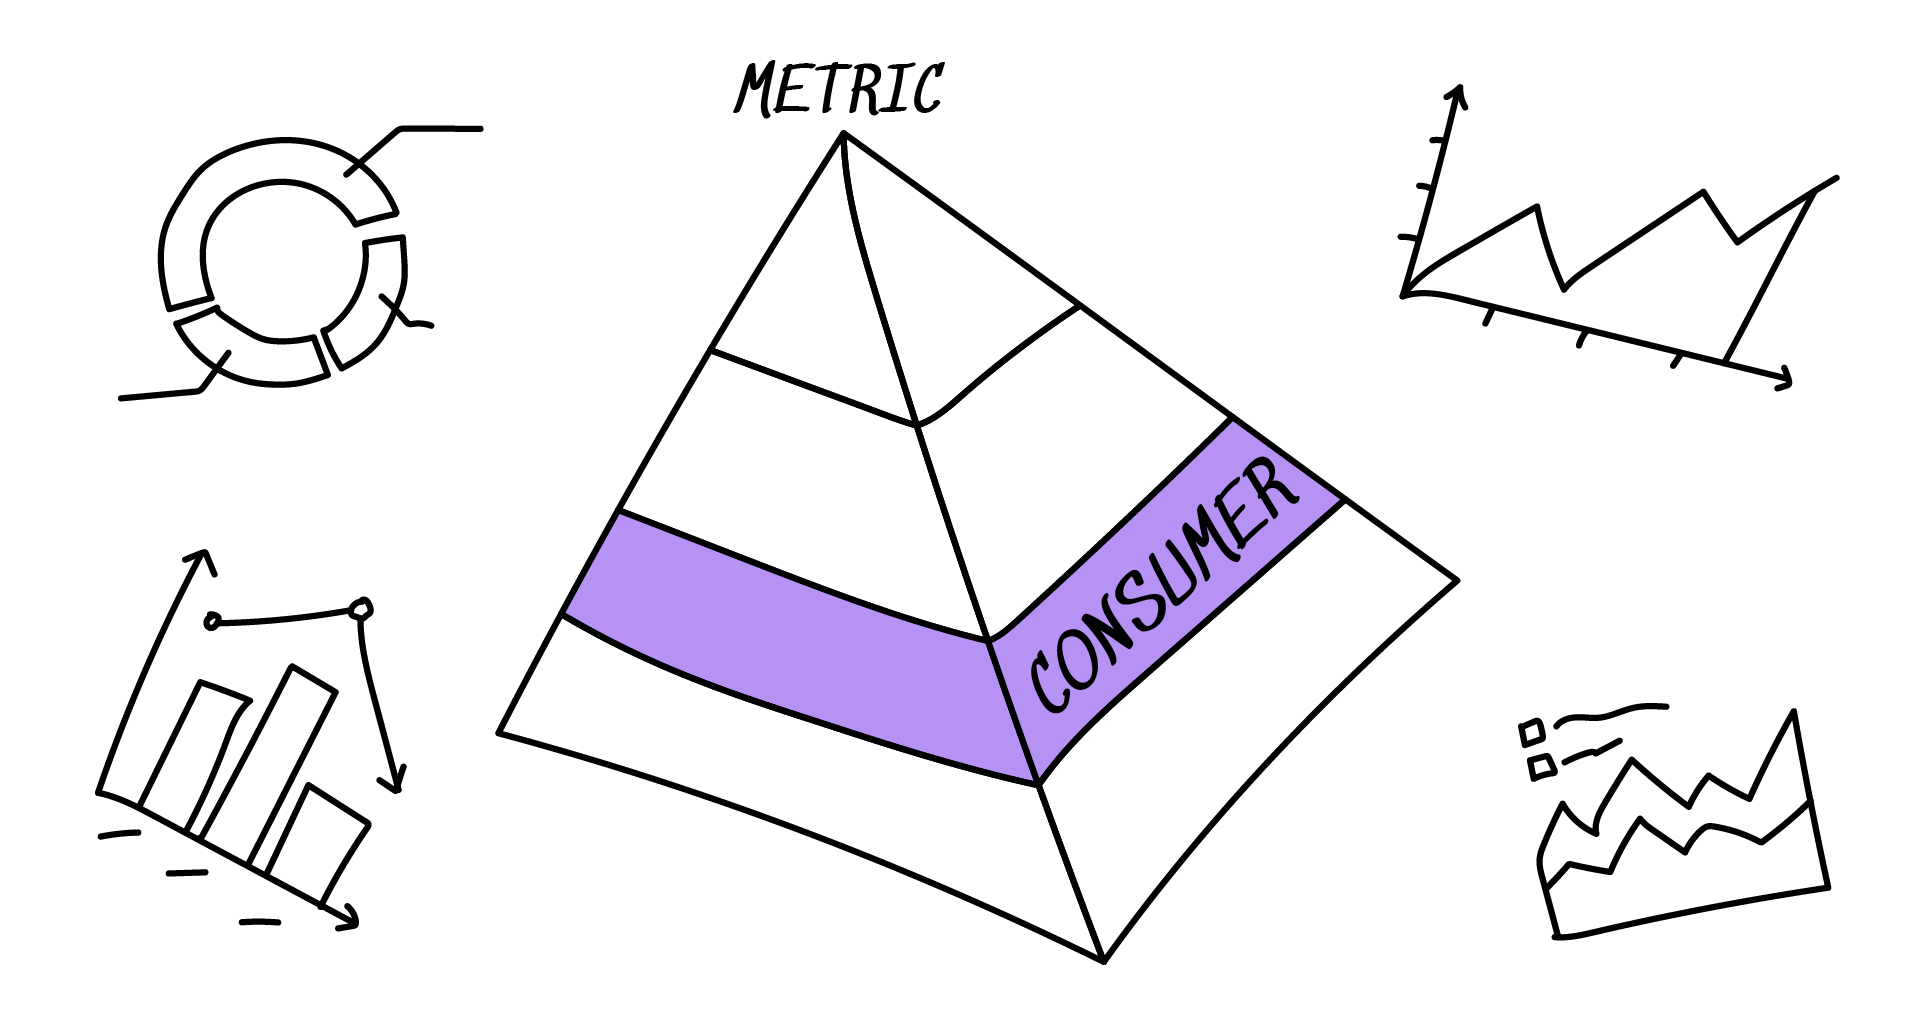 The consumer of the metric